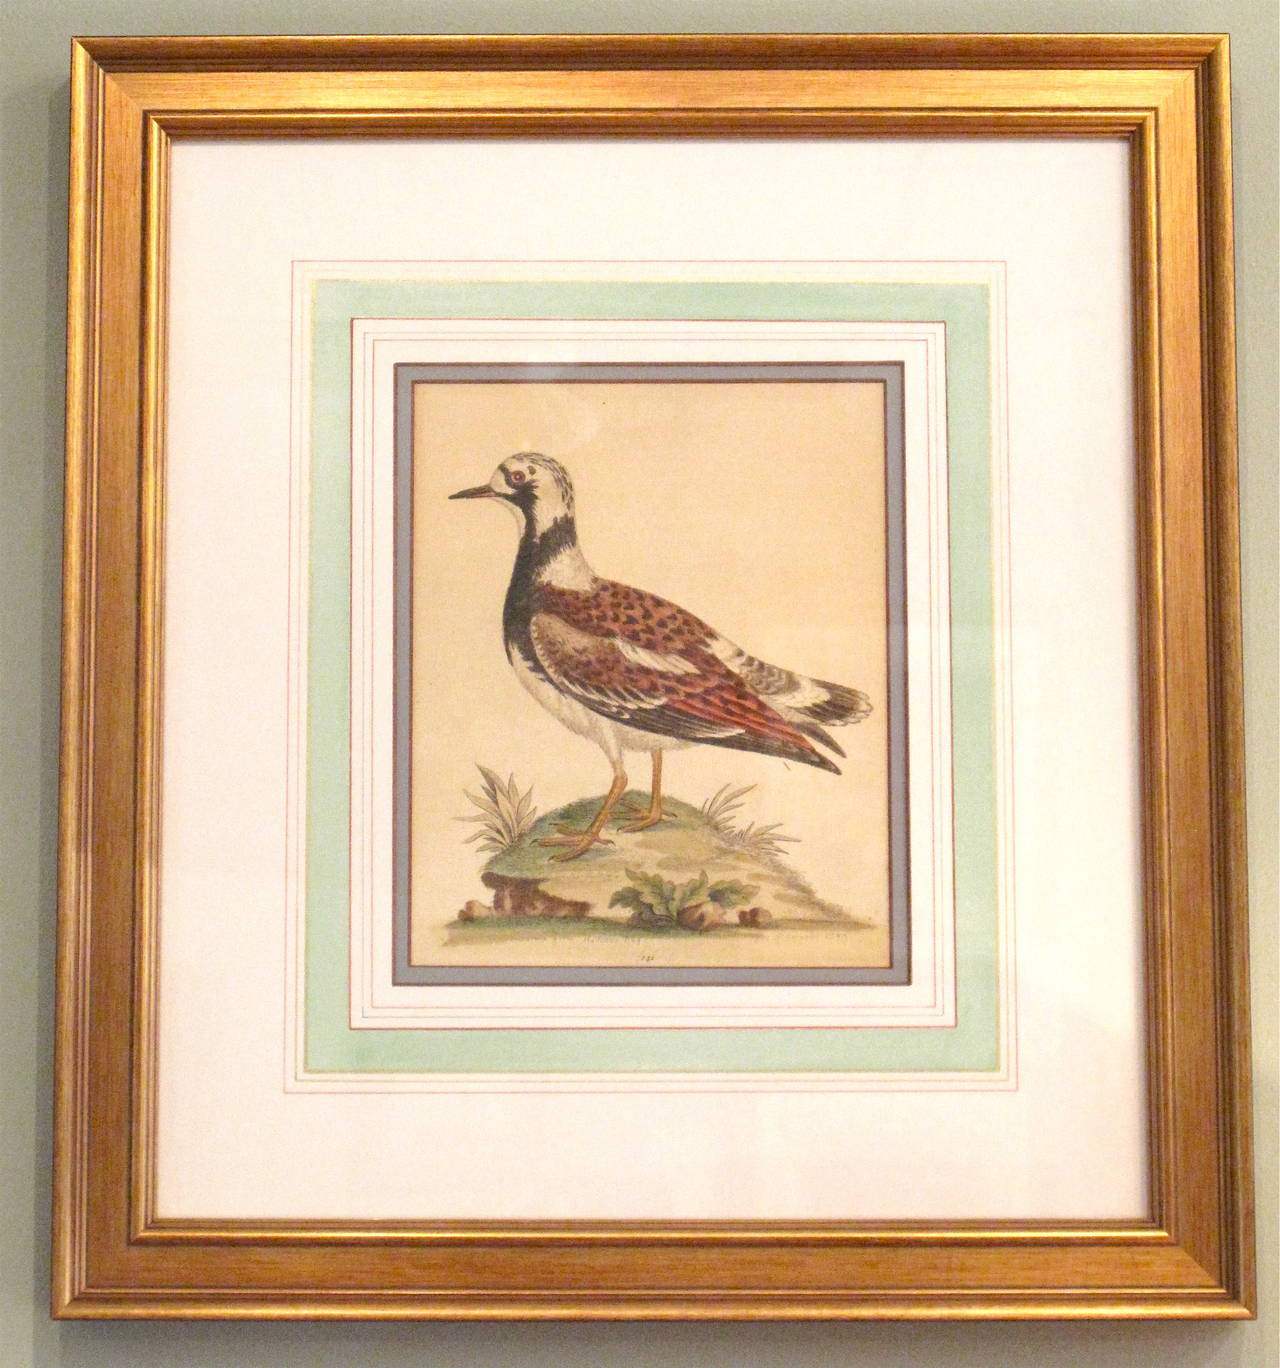 Four Mid-18th Century Bird Engravings by George Edwards In Good Condition For Sale In Charlottesville, VA